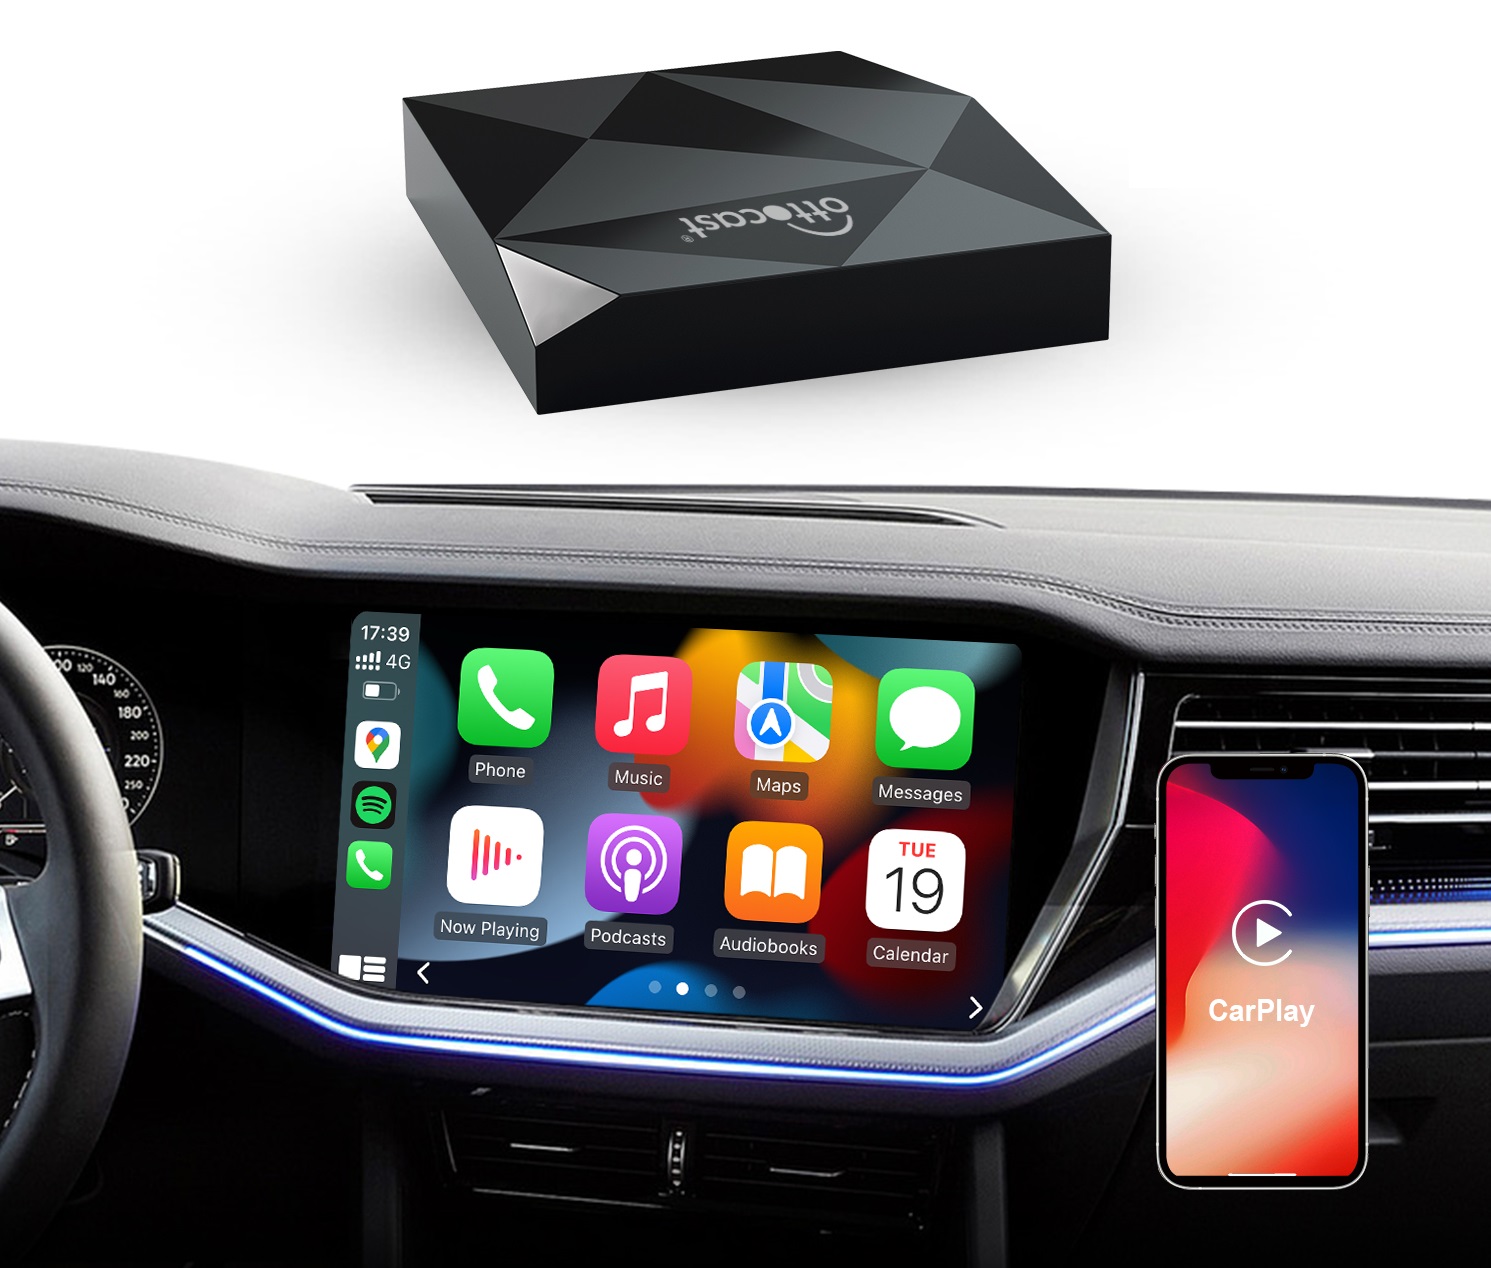 OTTOCAST Wired To Wireless CarPlay Adapter U2 Air PRO CarPlay Mini Box  Bluetooth Connect 14S Connection Plug & Play